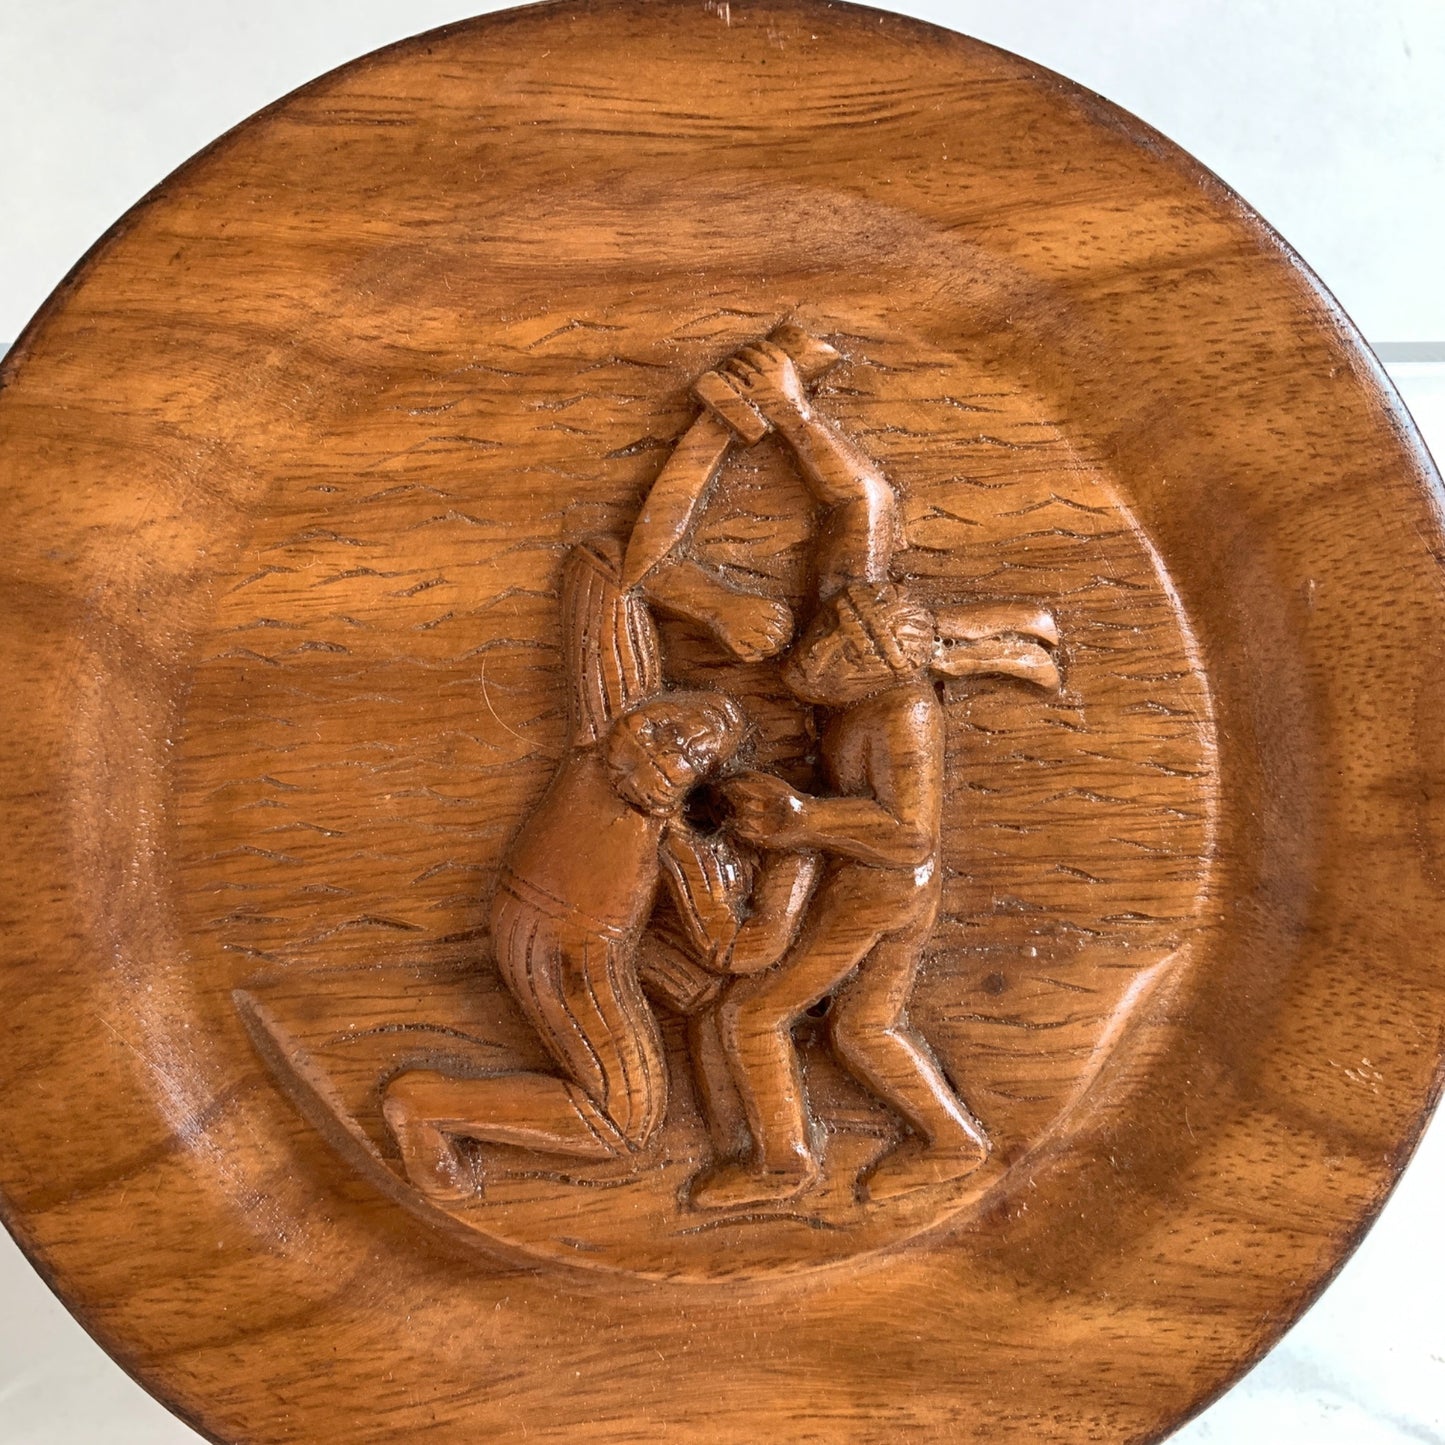 Philippines War Scene Carved Onto Wooden Plate Decorative